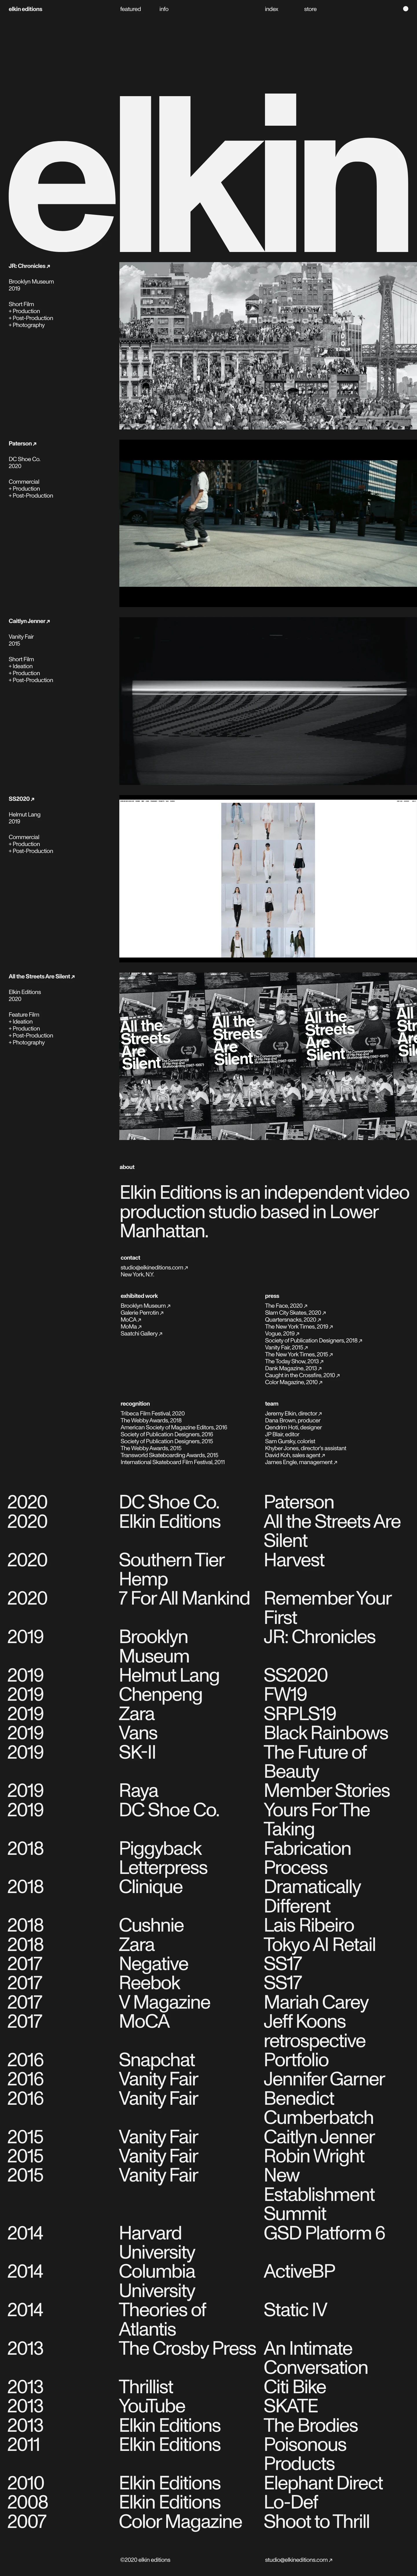 Elkin Editions Landing Page Example: Elkin Editions is an independent video production studio based in Lower Manhattan.